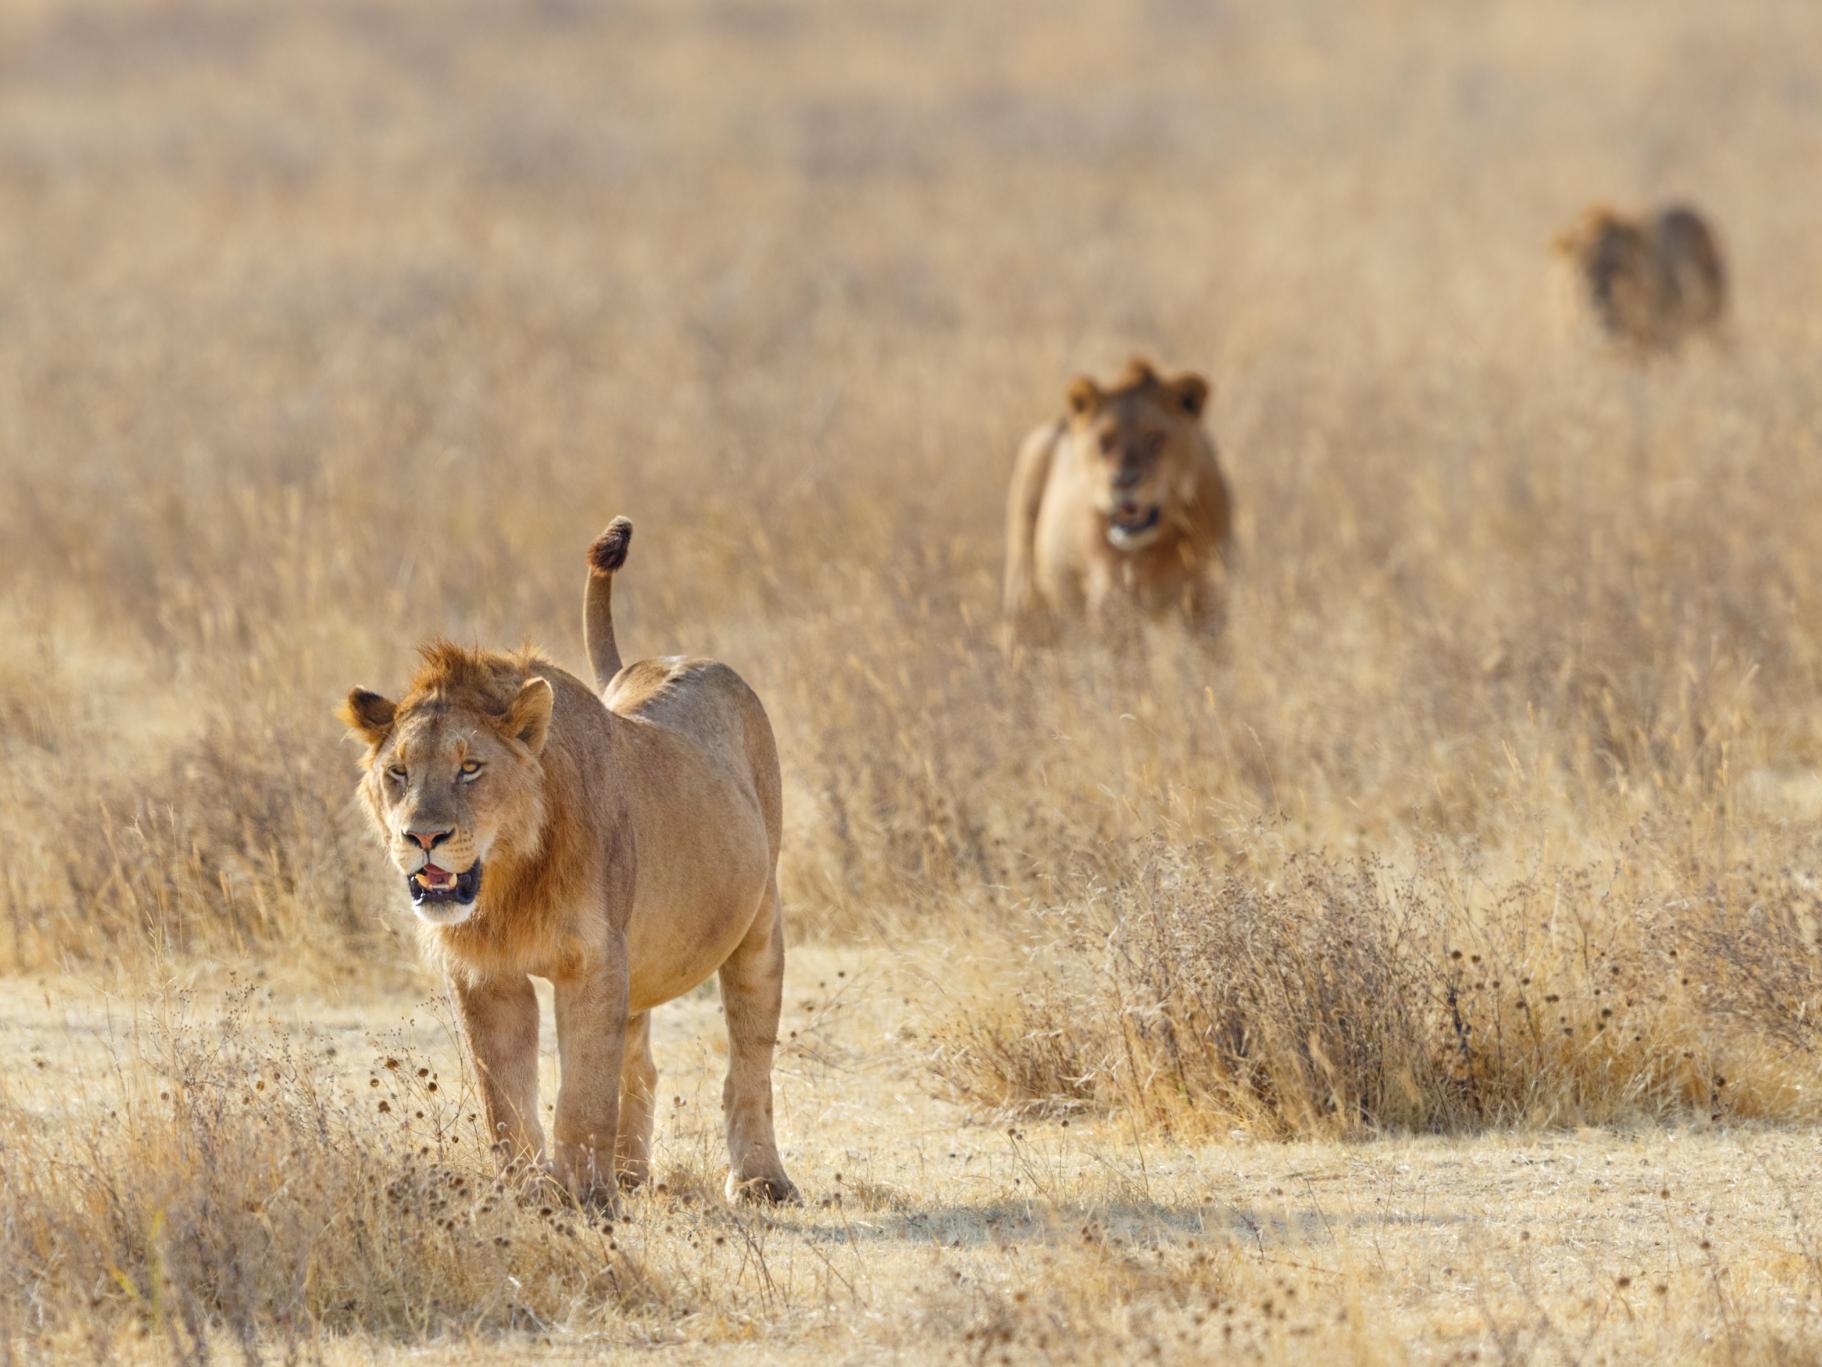 Fourteen lions on the loose in South Africa after escaping national park